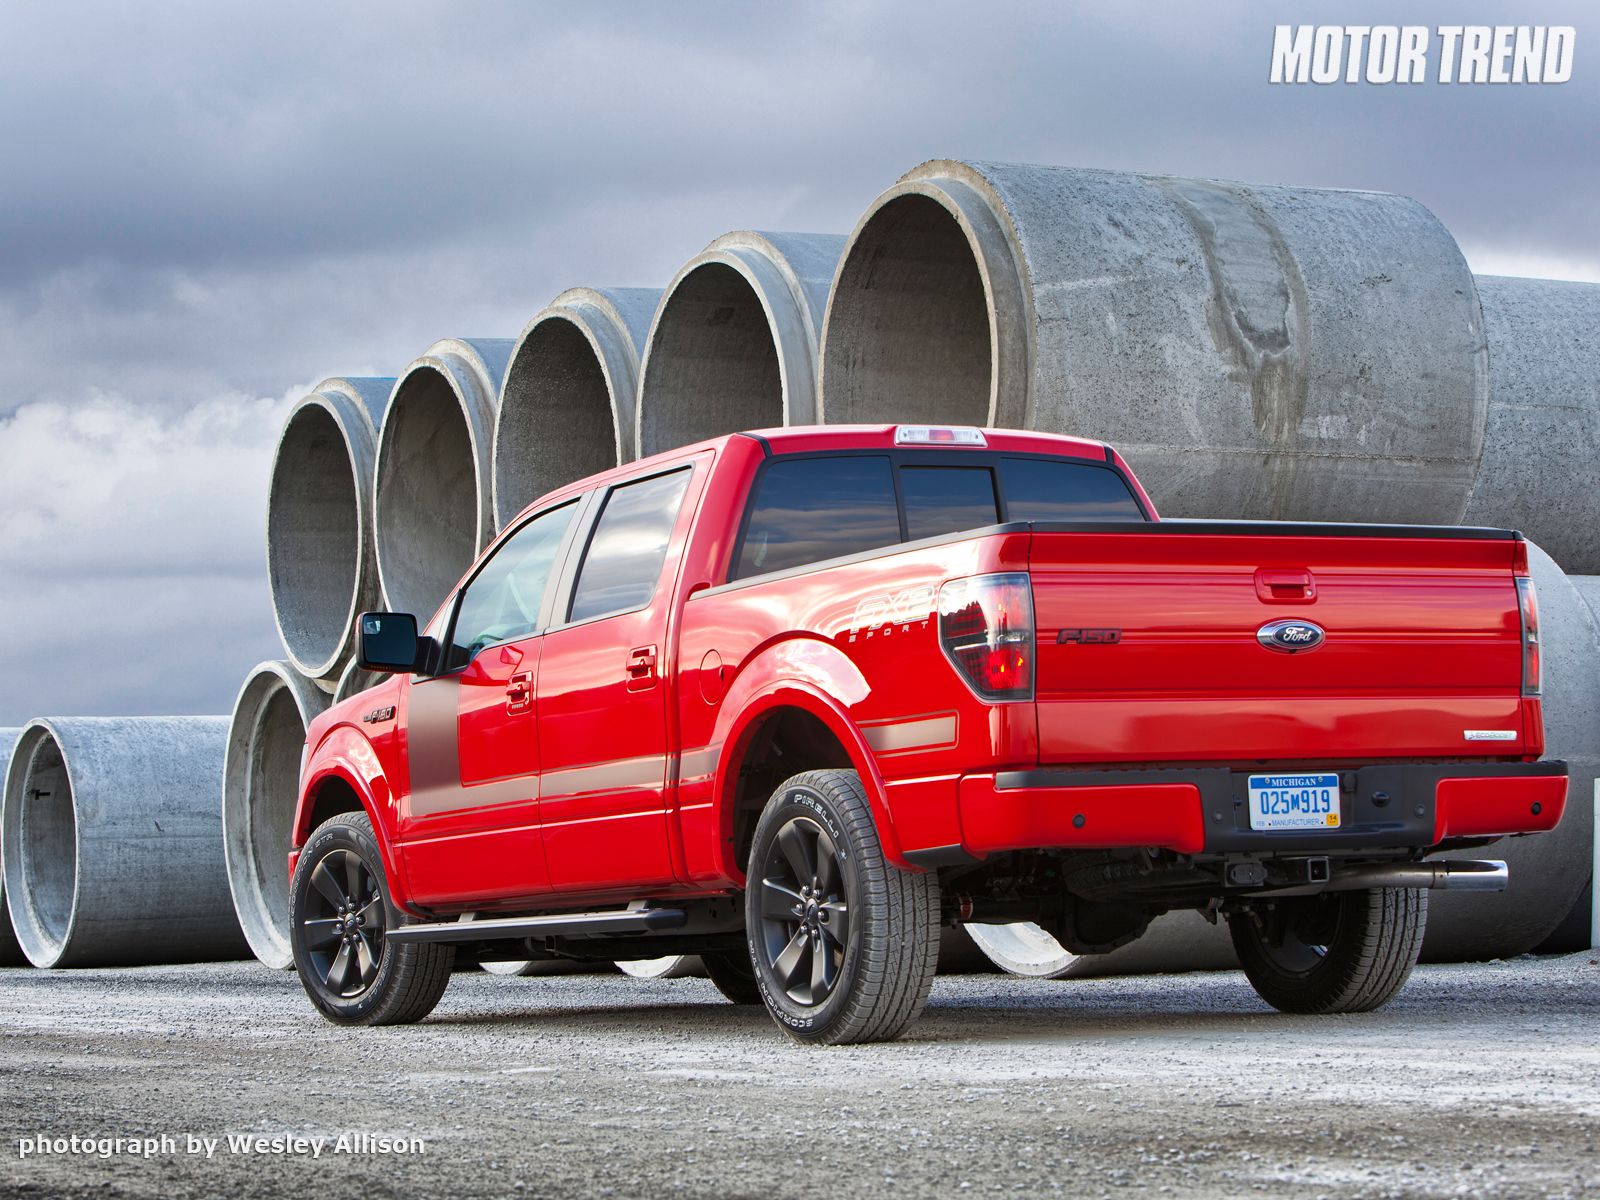 Ford F 150   2012 Truck of the Year Wallpaper   Motor Trend 1600x1200